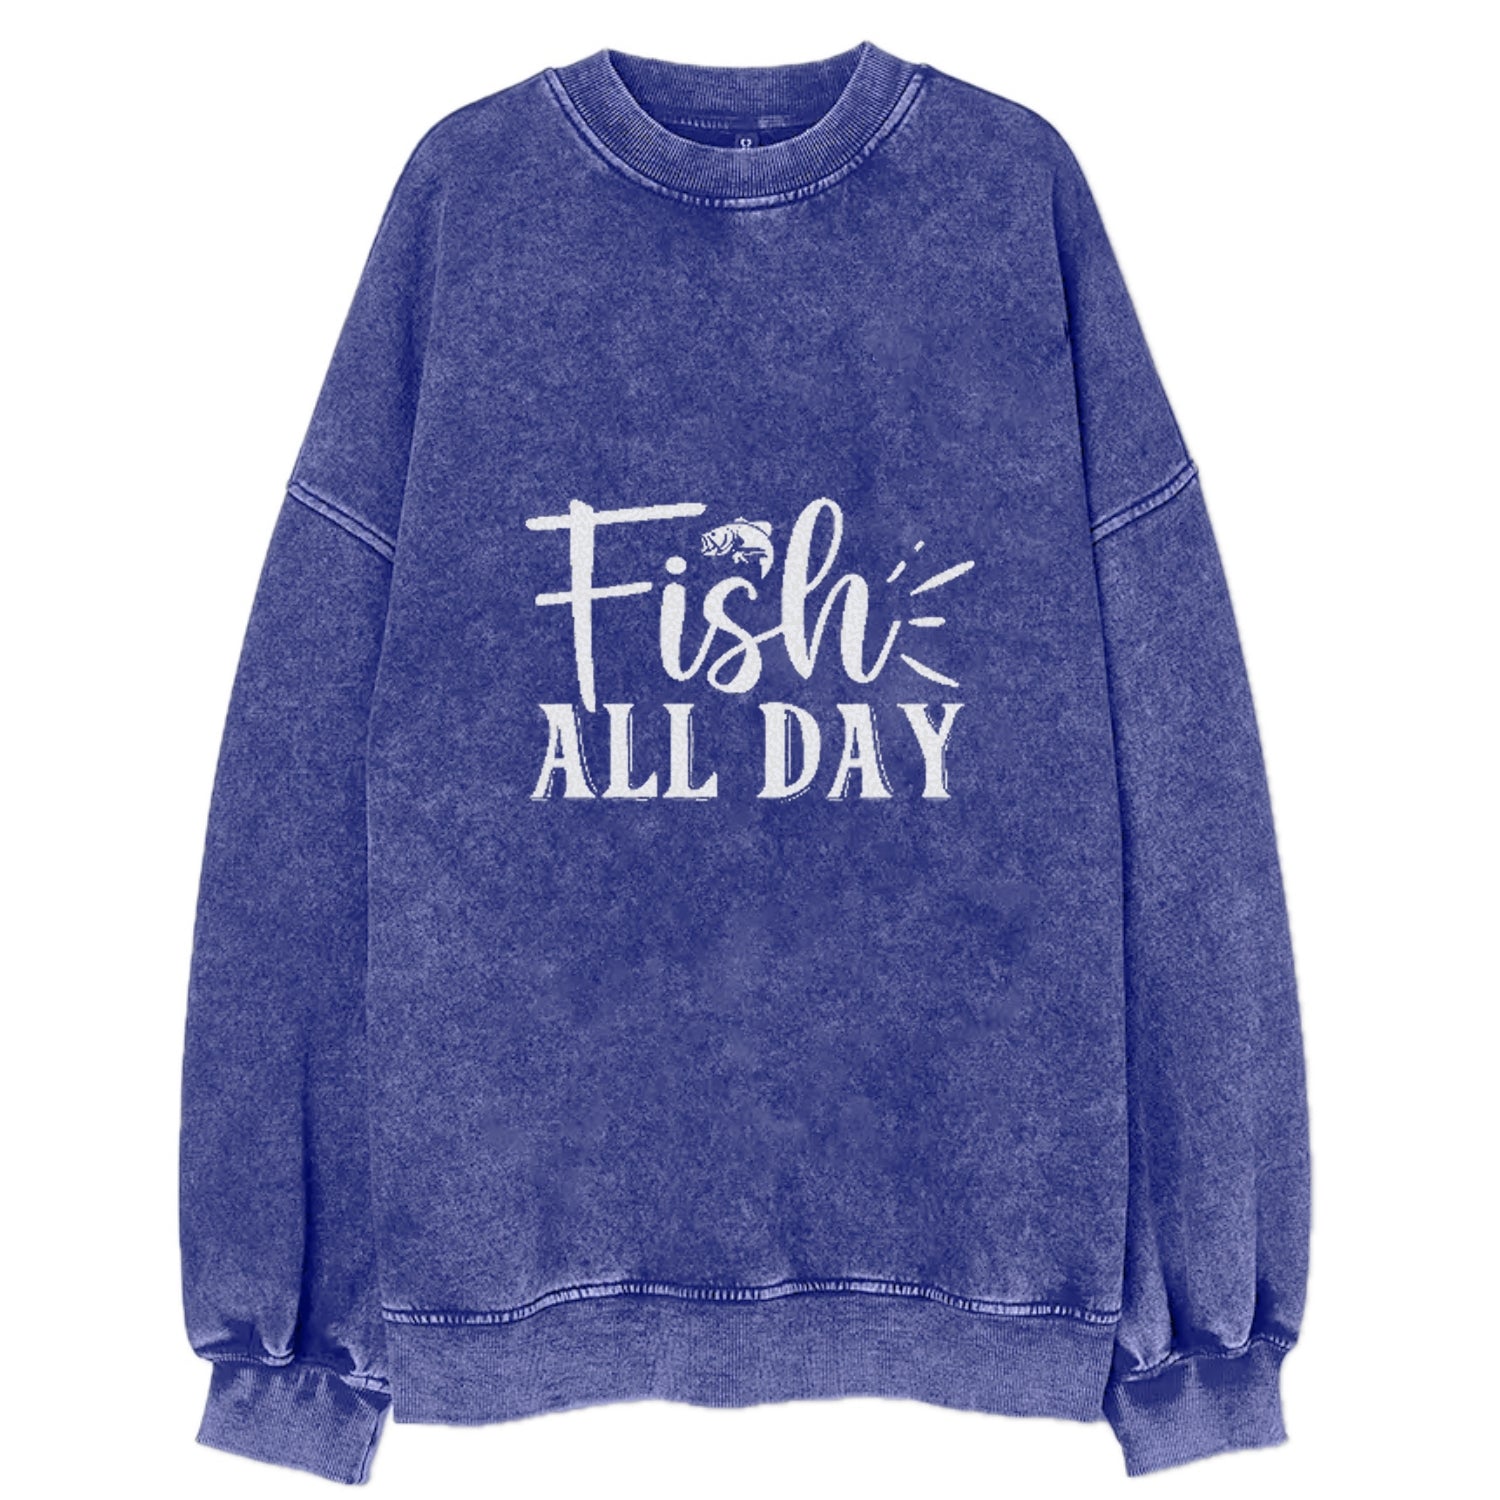 fish all day Hat